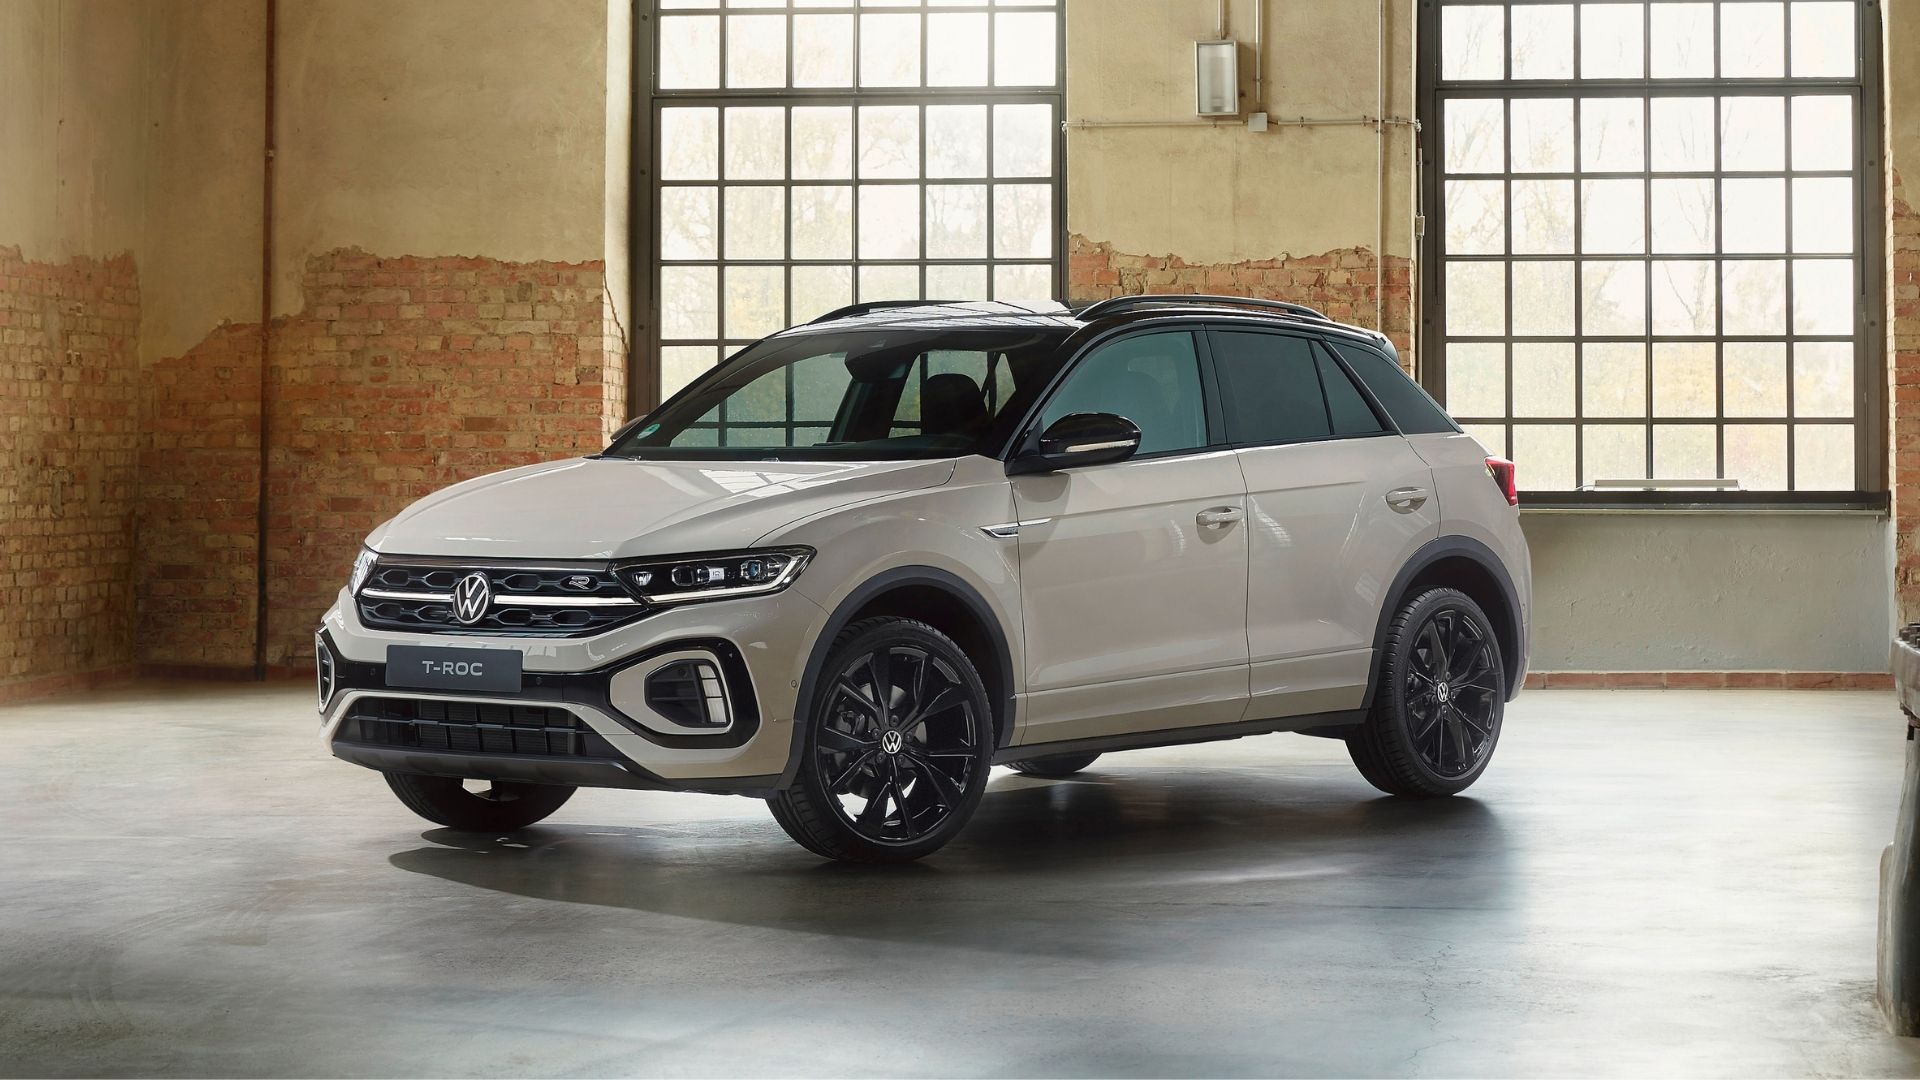 Volkswagen T-Roc Facelift Revealed, Mature Enough To Compete Against Jeep  Compass In India - The Indian Wire